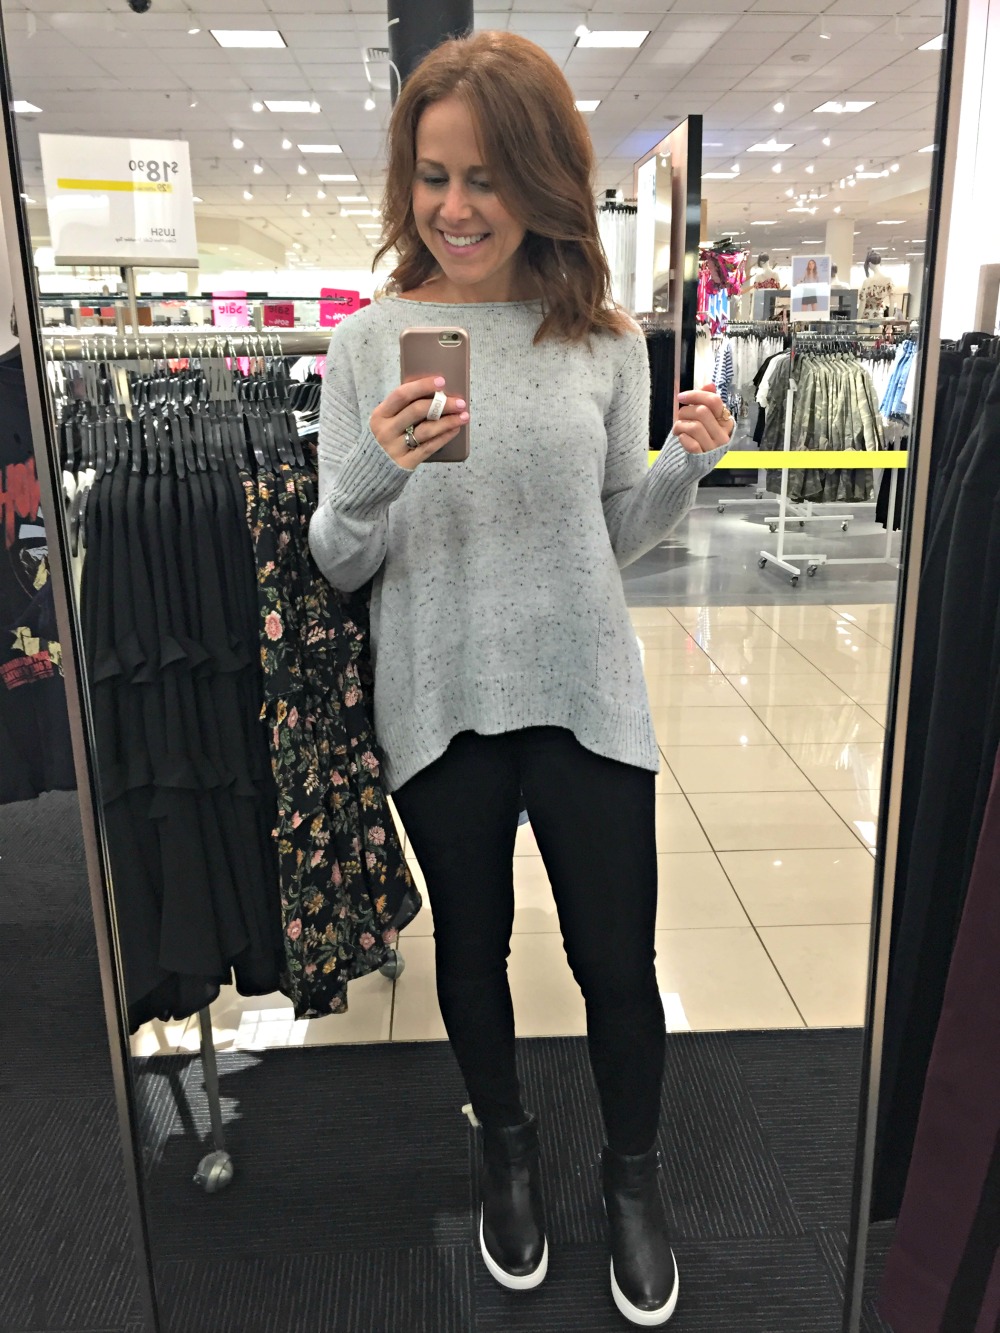 Nordstrom Anniversary sale 2017 // The Modern Savvy shares her 50 top finds, plus lots of dressing room selfies to see how everything looks on a real girl - Nordstrom Anniversary Sale Top 50 Picks featured by popular Florida style blogger, The Modern Savvy